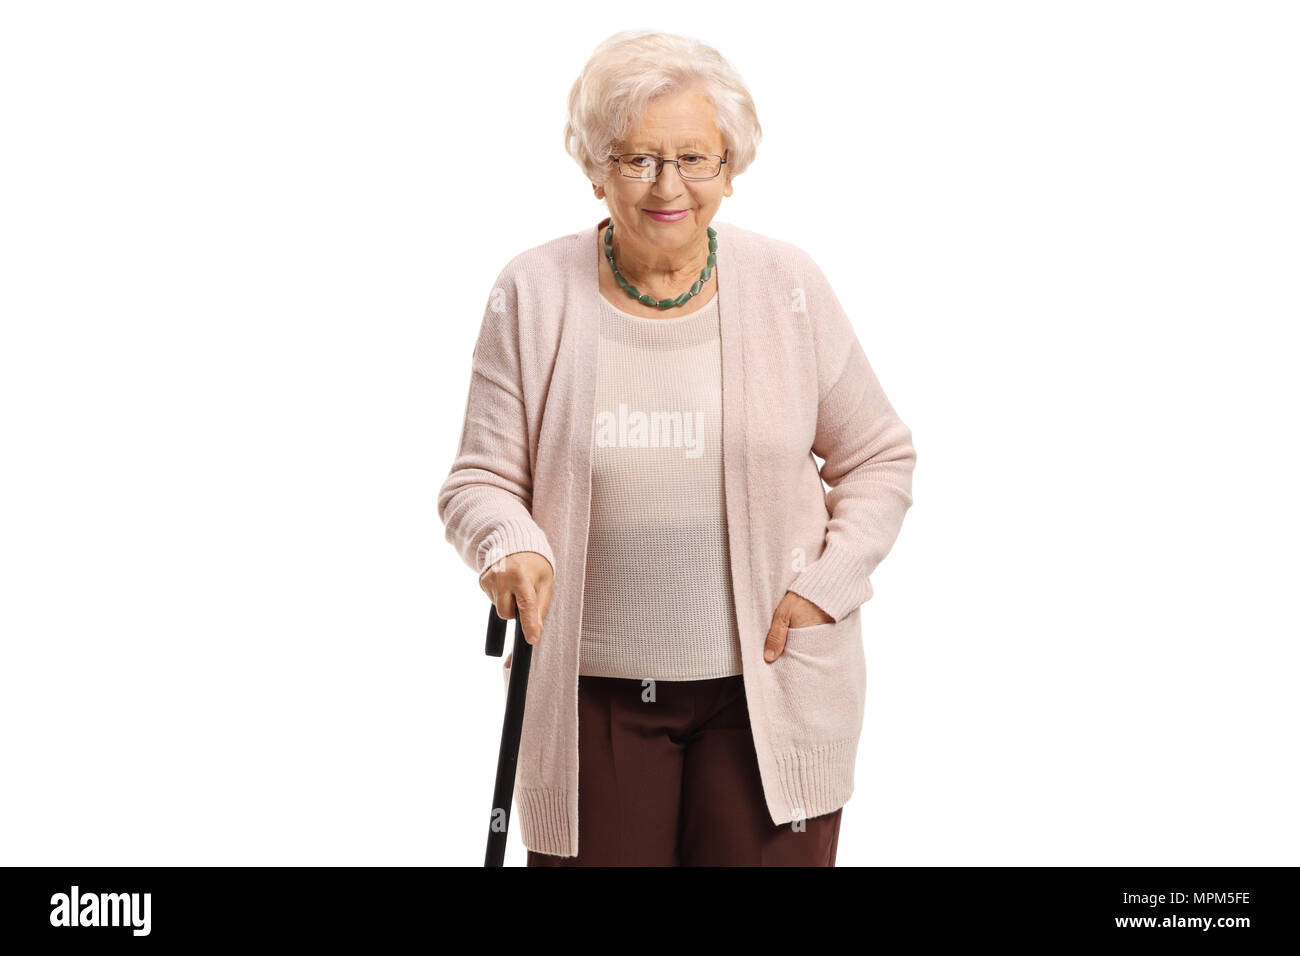 Elderly woman with a walking cane isolated on white background Stock Photo